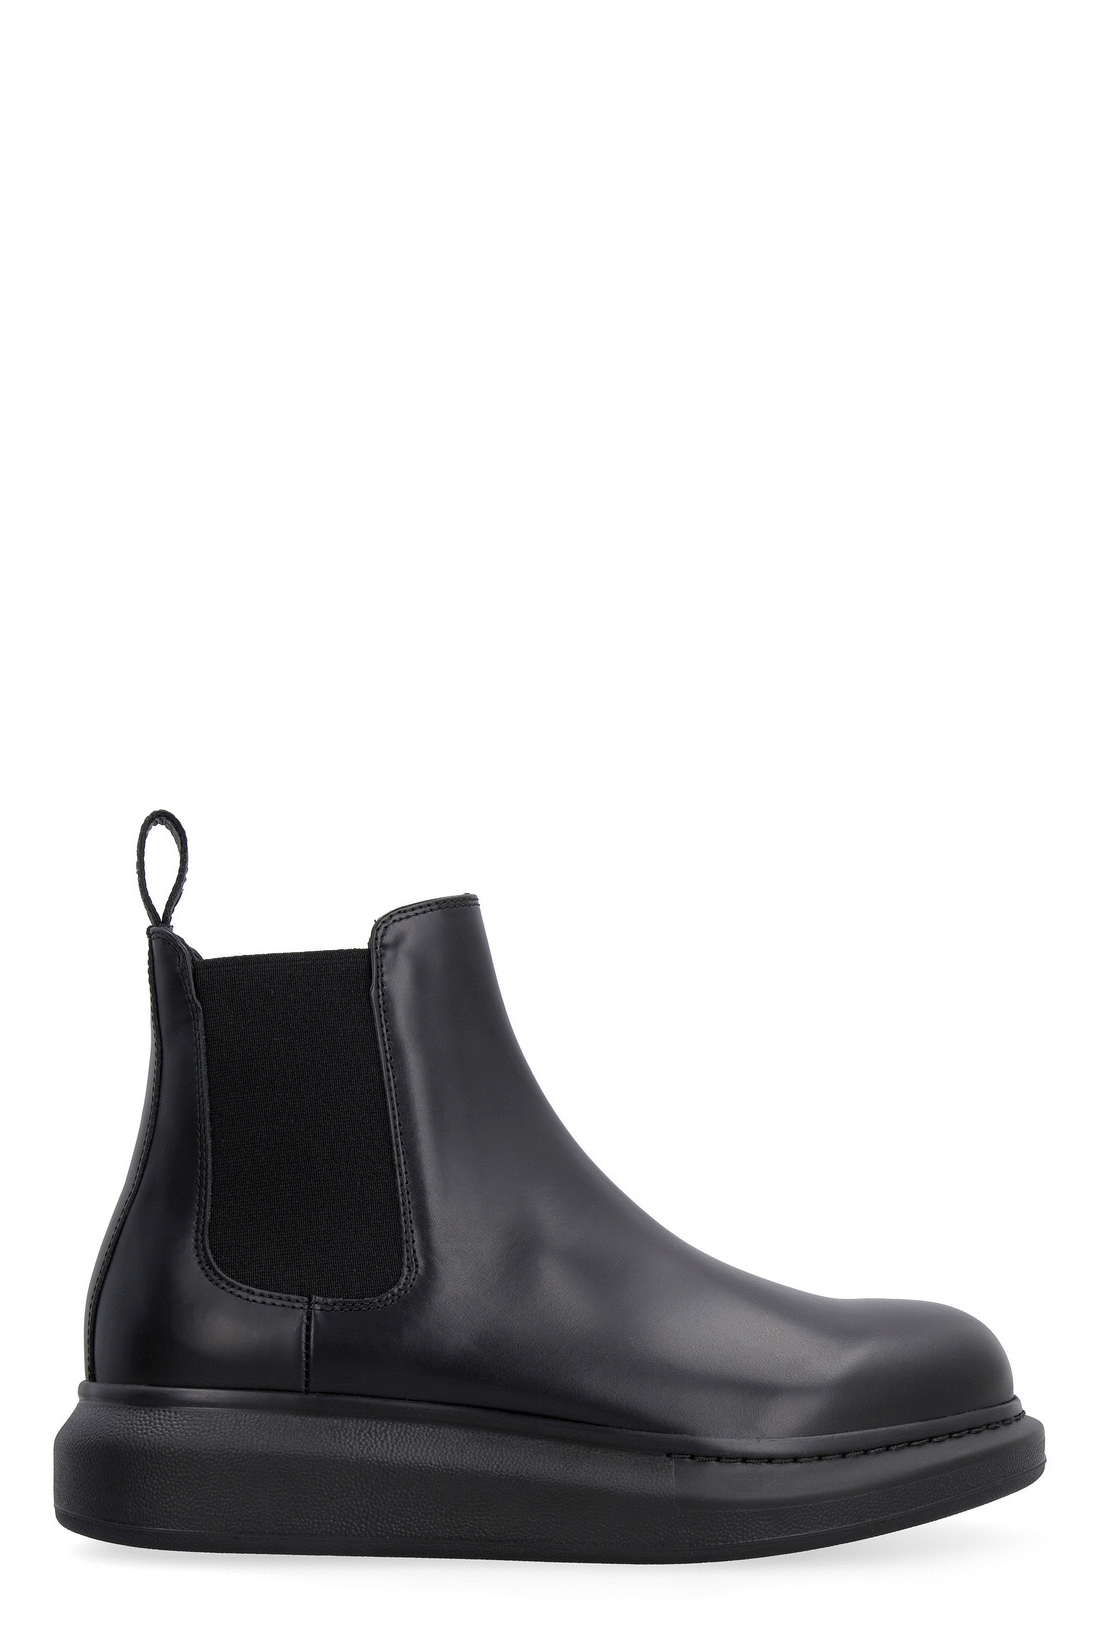 Hybrid leather Chelsea boots